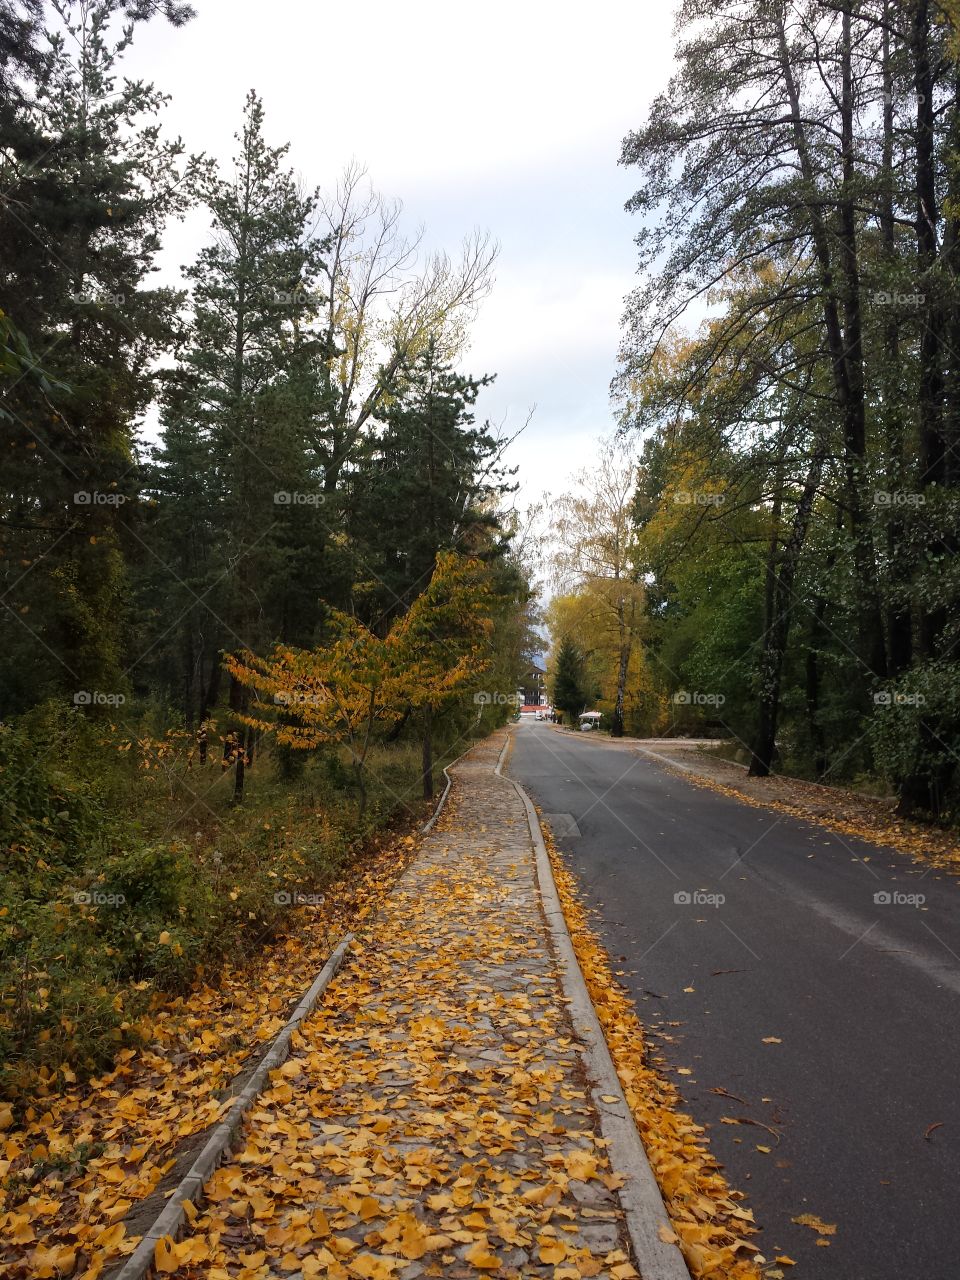 yellow leaves on the road